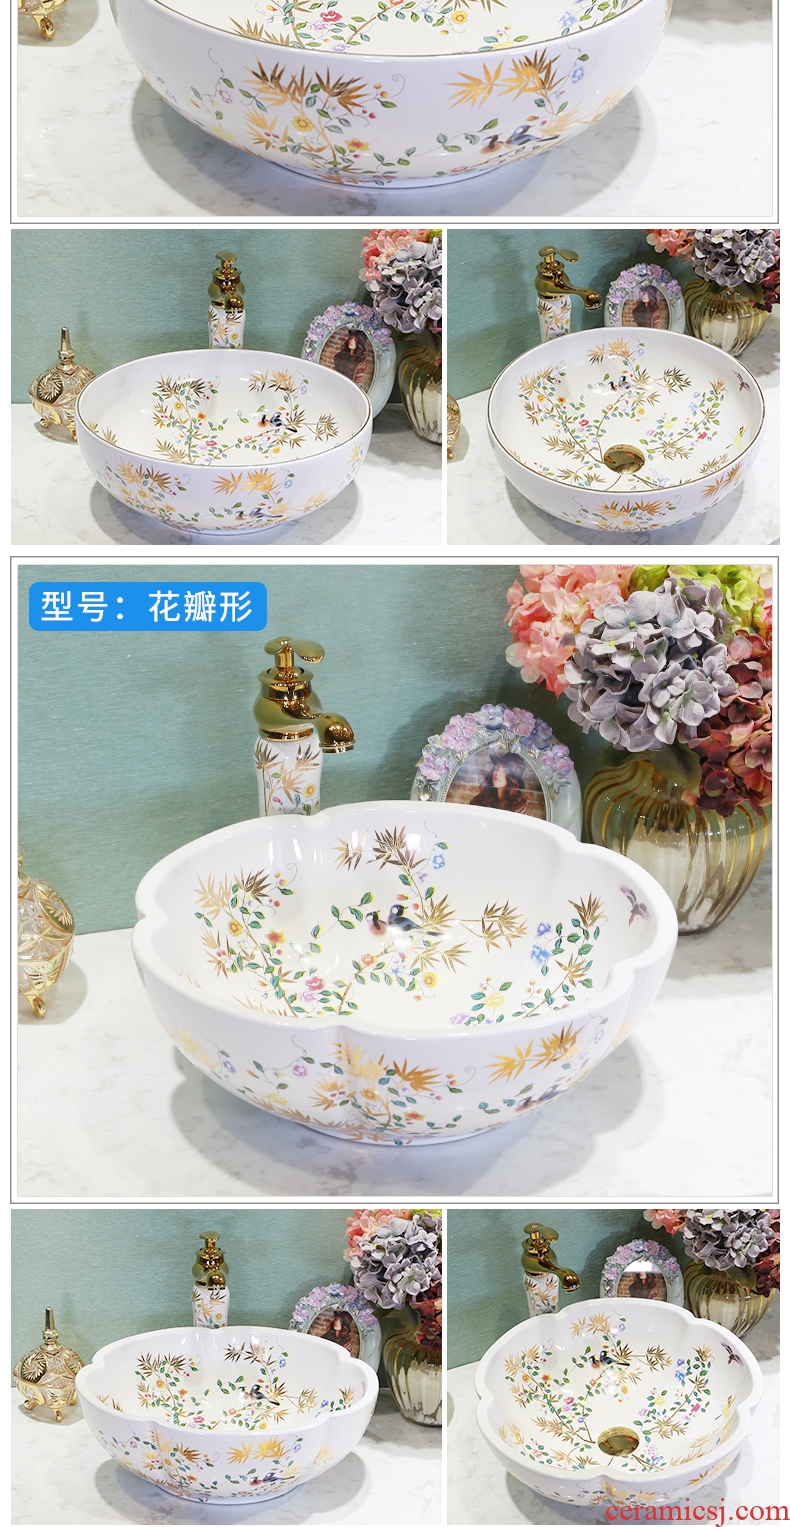 Million birds stage basin sink ceramic square art basin bathroom sinks the basin that wash a face wash one household